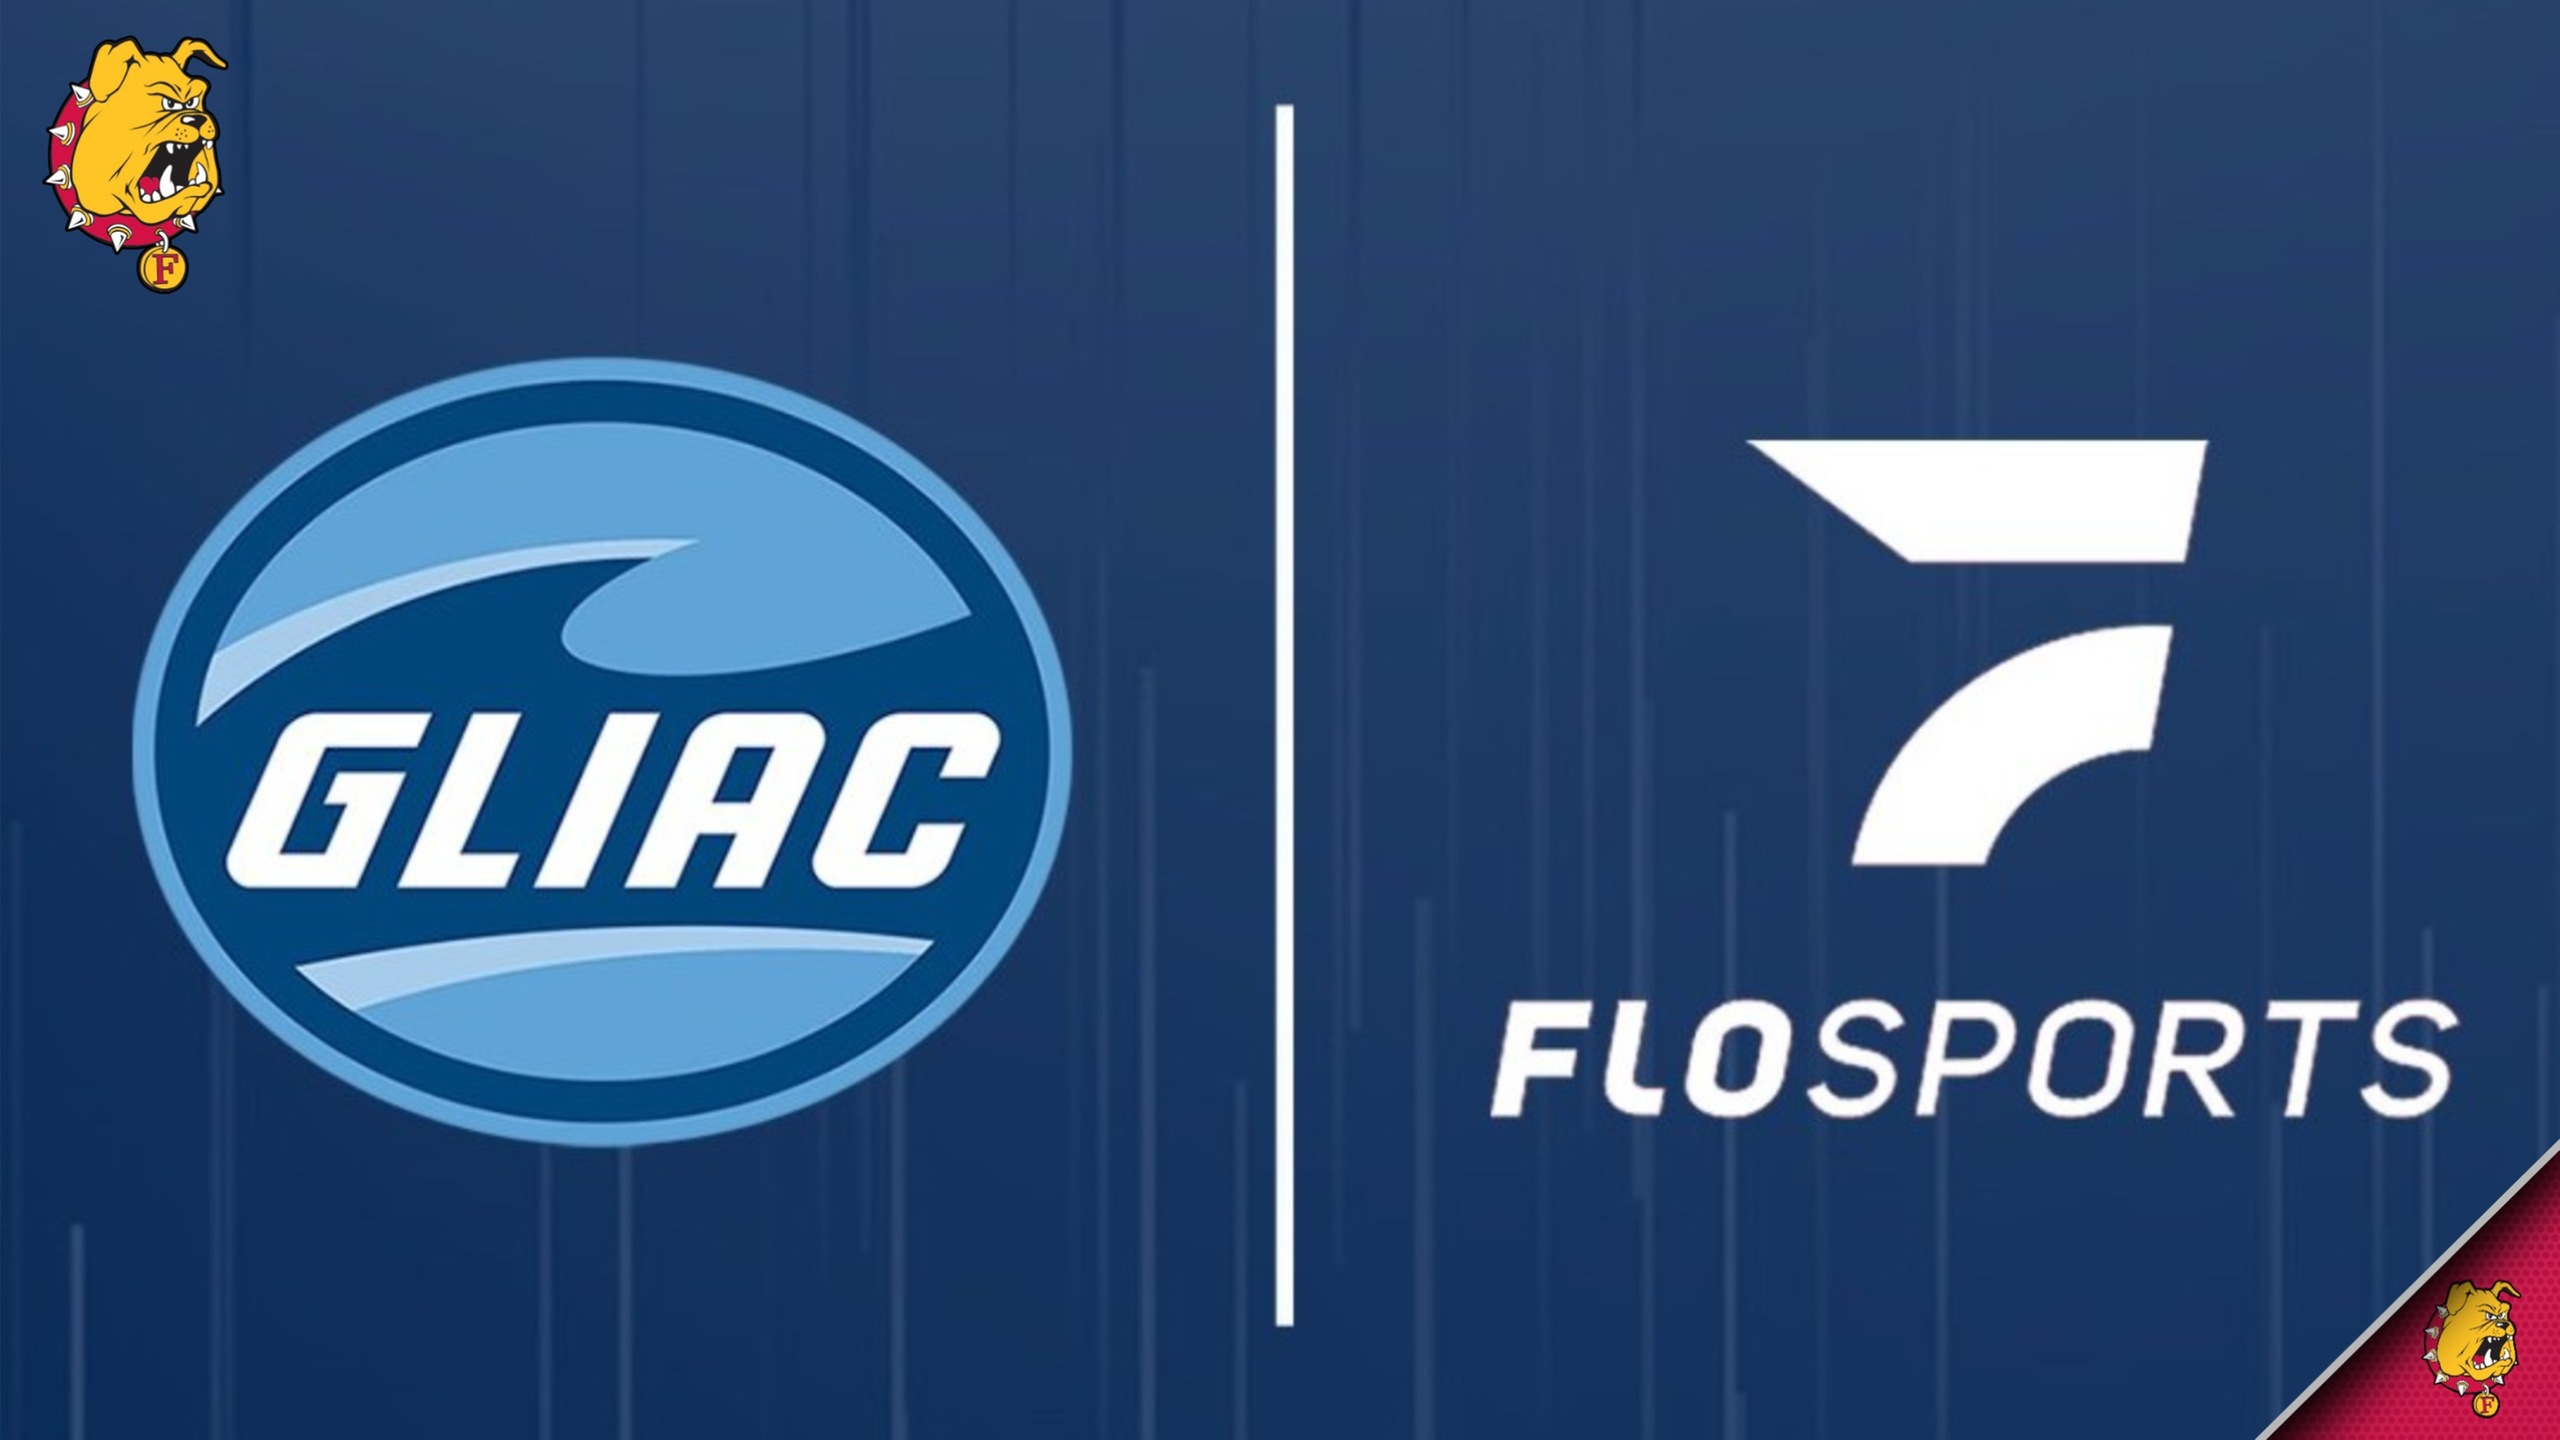 GLIAC Announces Record-Setting NCAA Division II Streaming Rights Partnership With FloSports